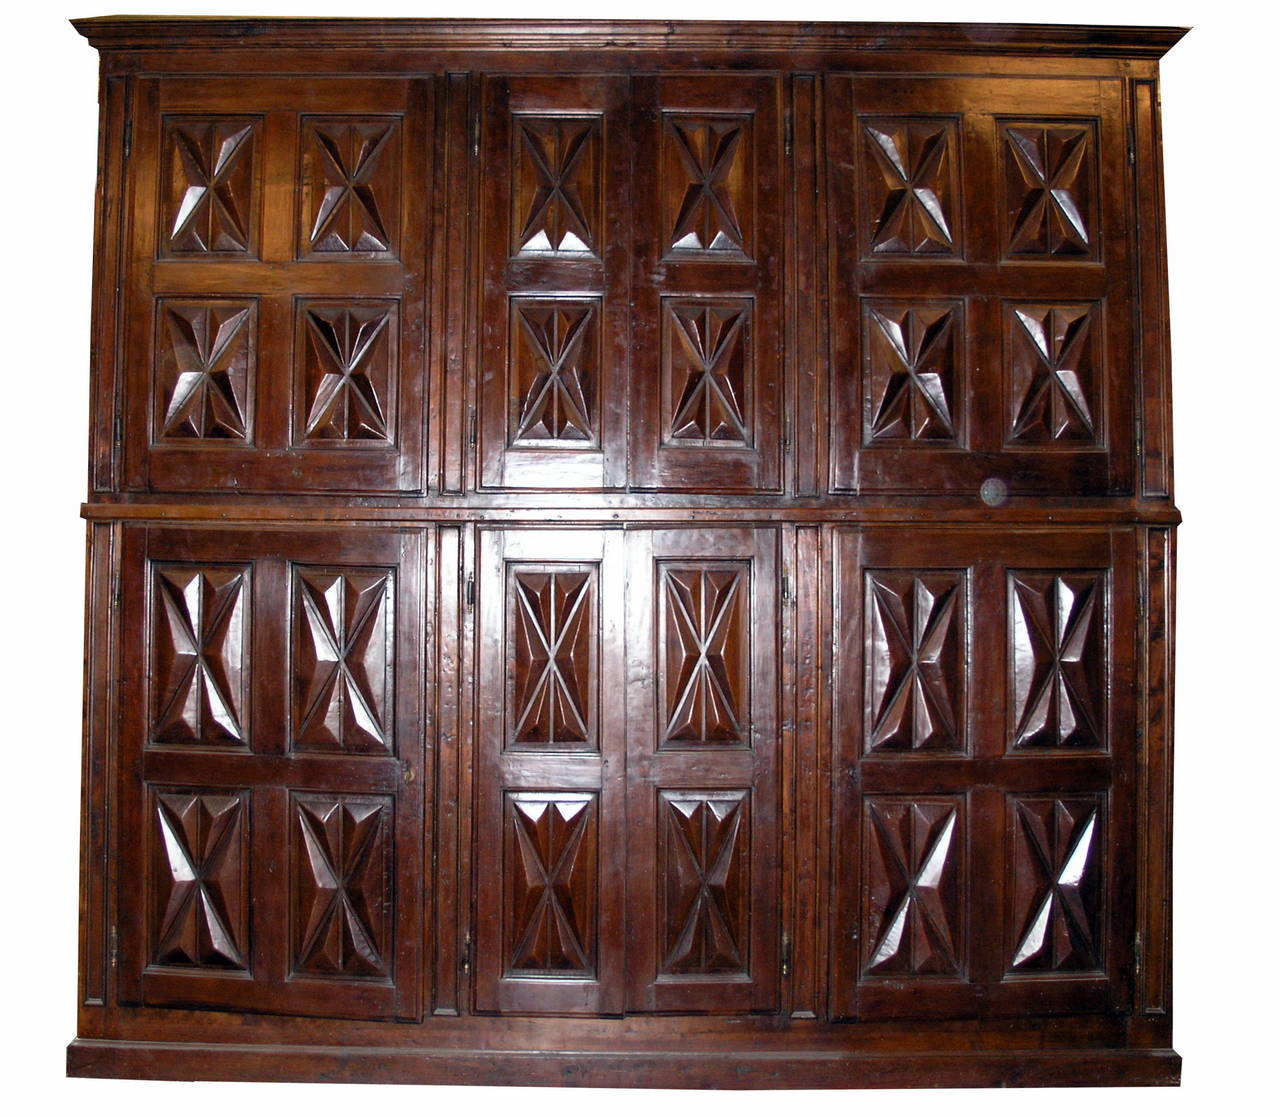 Antique closet made of poplar.
Comes from Piemonte, Italy.